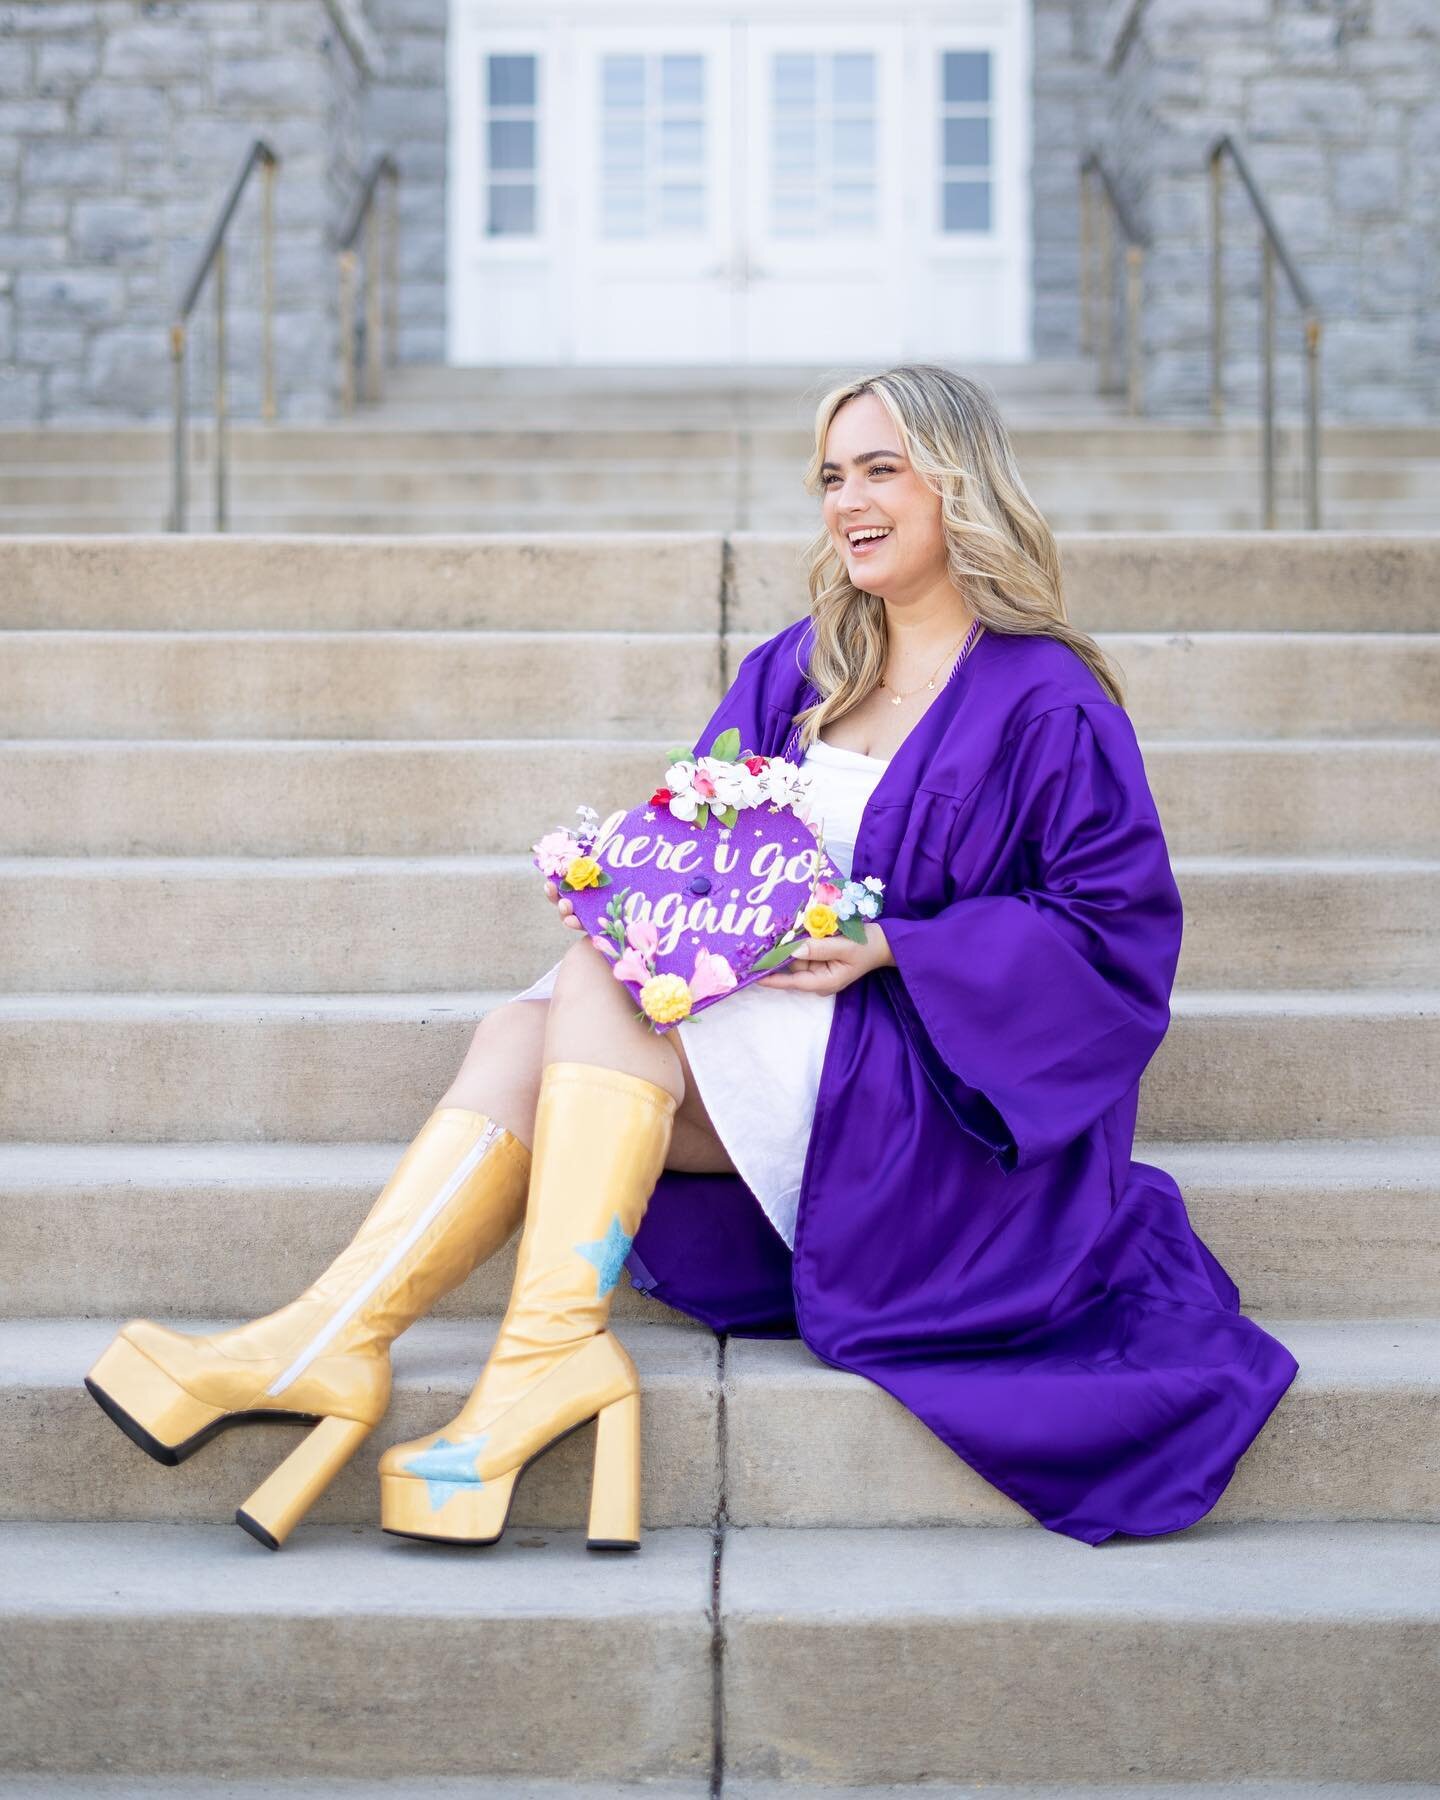 let&rsquo;s be honest&hellip;.wouldn&rsquo;t be a real college grad if i didn&rsquo;t walk across the stage in platform gold gogo boots👢🪩🎓✨

🎞️- @nick.le.photography